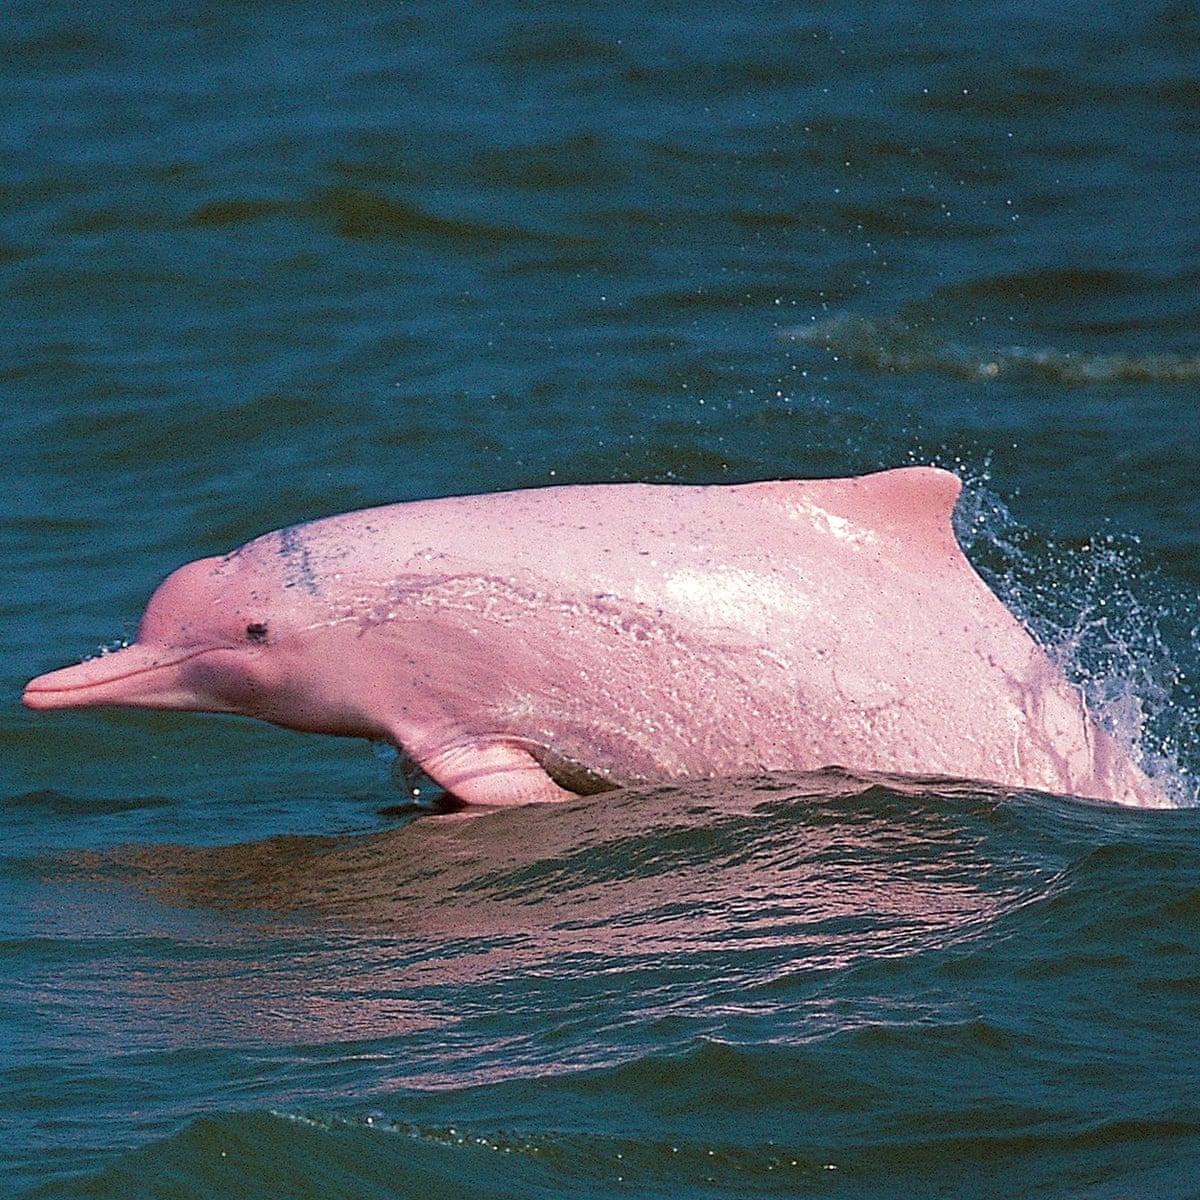 Chinese white dolphins